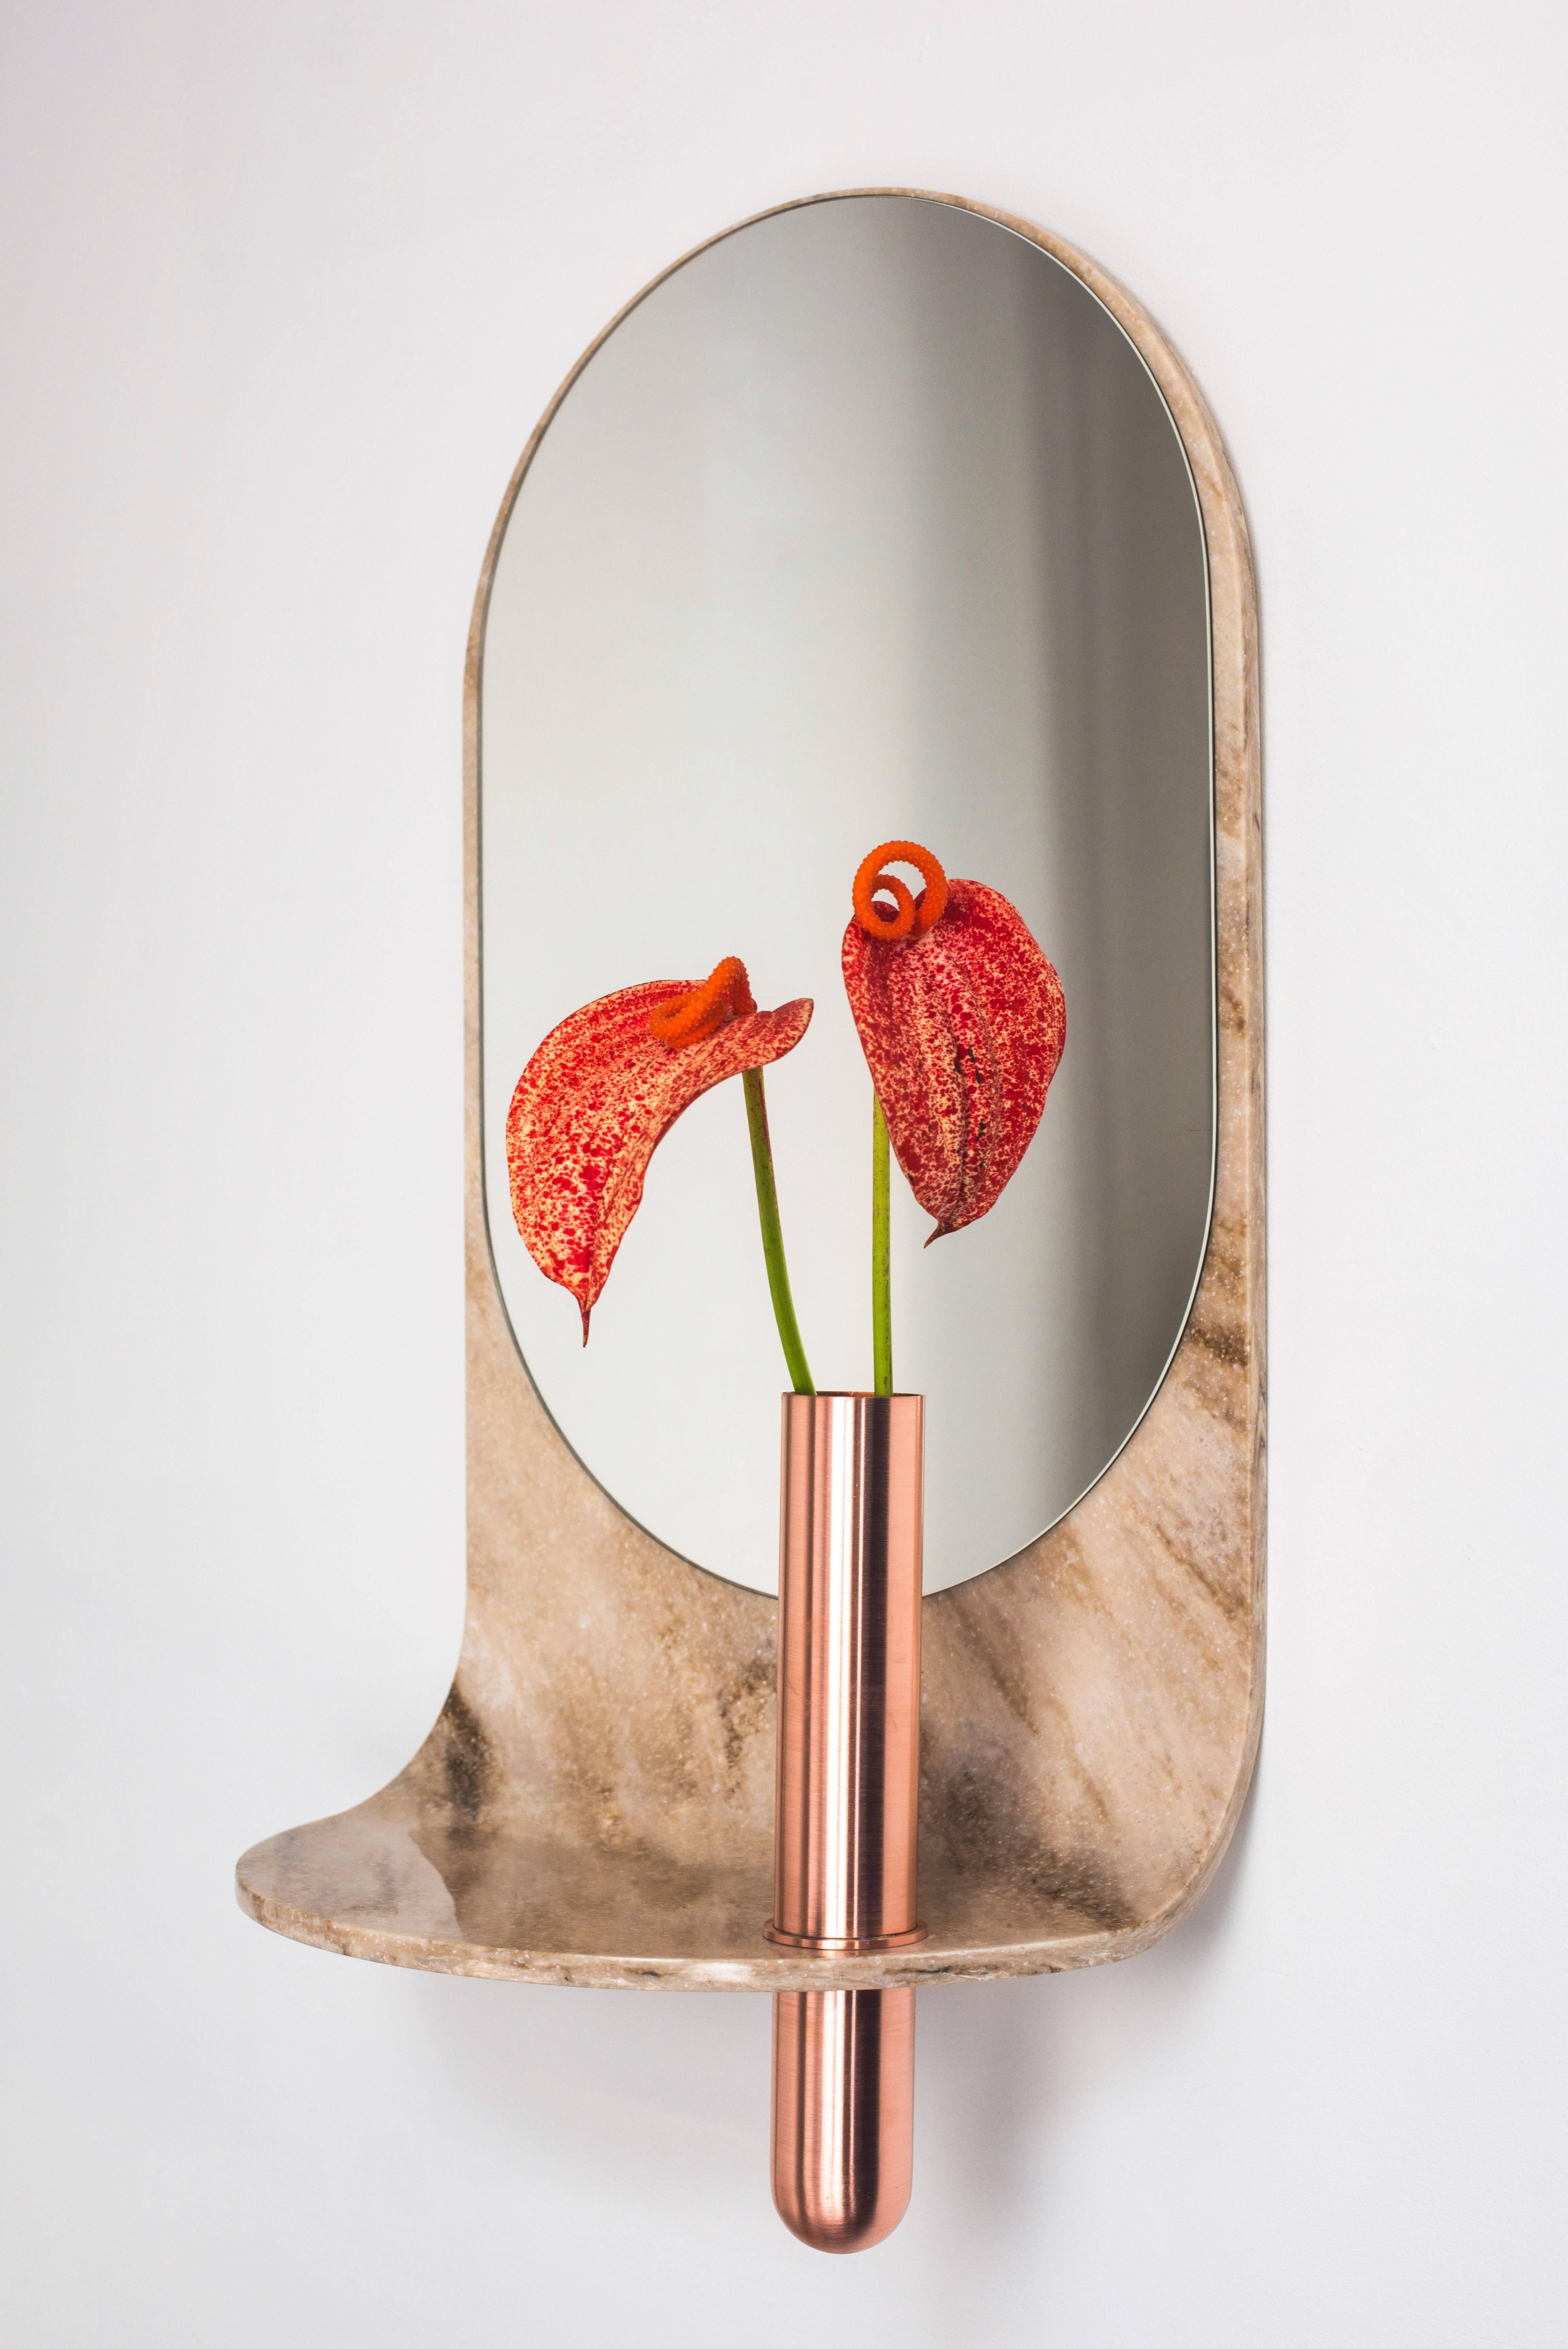 Flats, rounds, and streamlined profiles define the swoop Mirror. Made from thermoformed artificial stone and bronze. Perfect for entryways or hall areas, it provides a shelf for odds and ends like keys and wallets, a vase for flowers, and a gazing